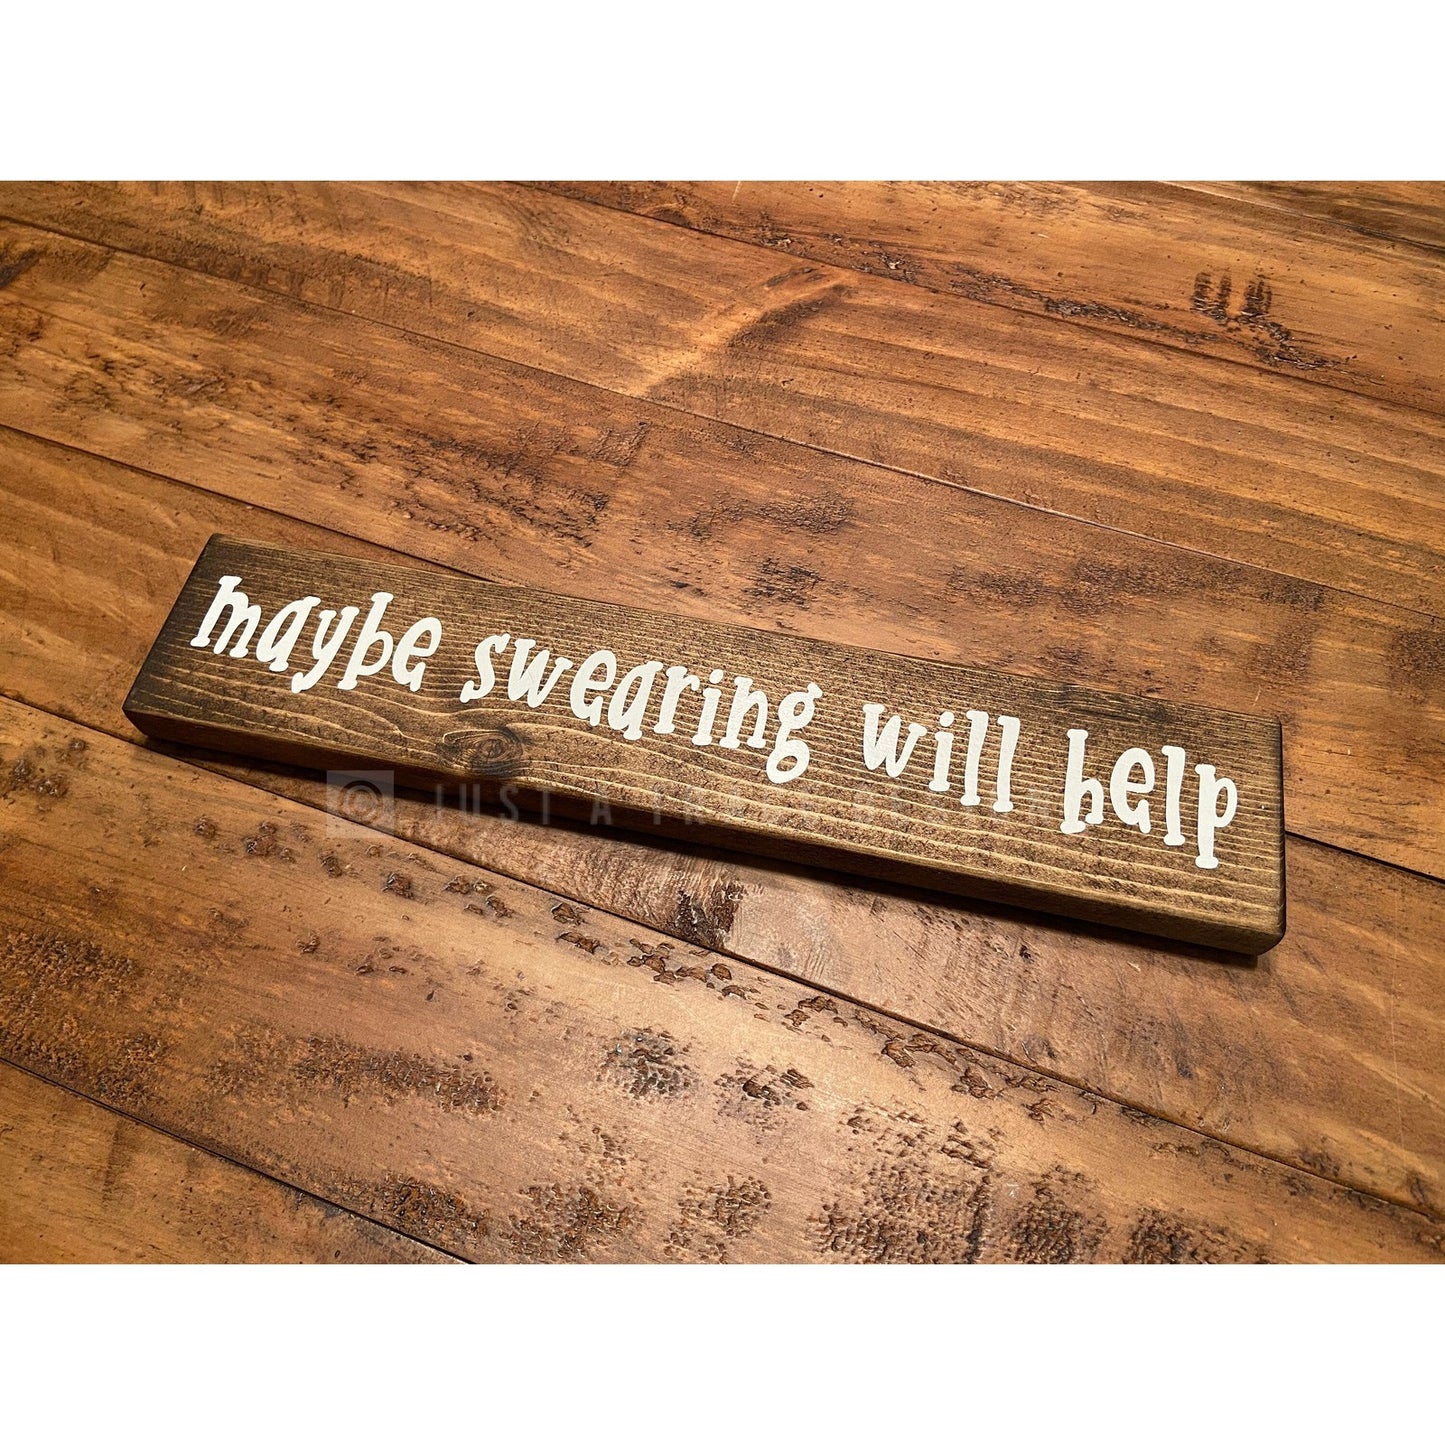 Maybe Swearing Will Help Sign | Wooden Sign | Funny | Home Decor | Shelf Sitter | 12" x 2.25"